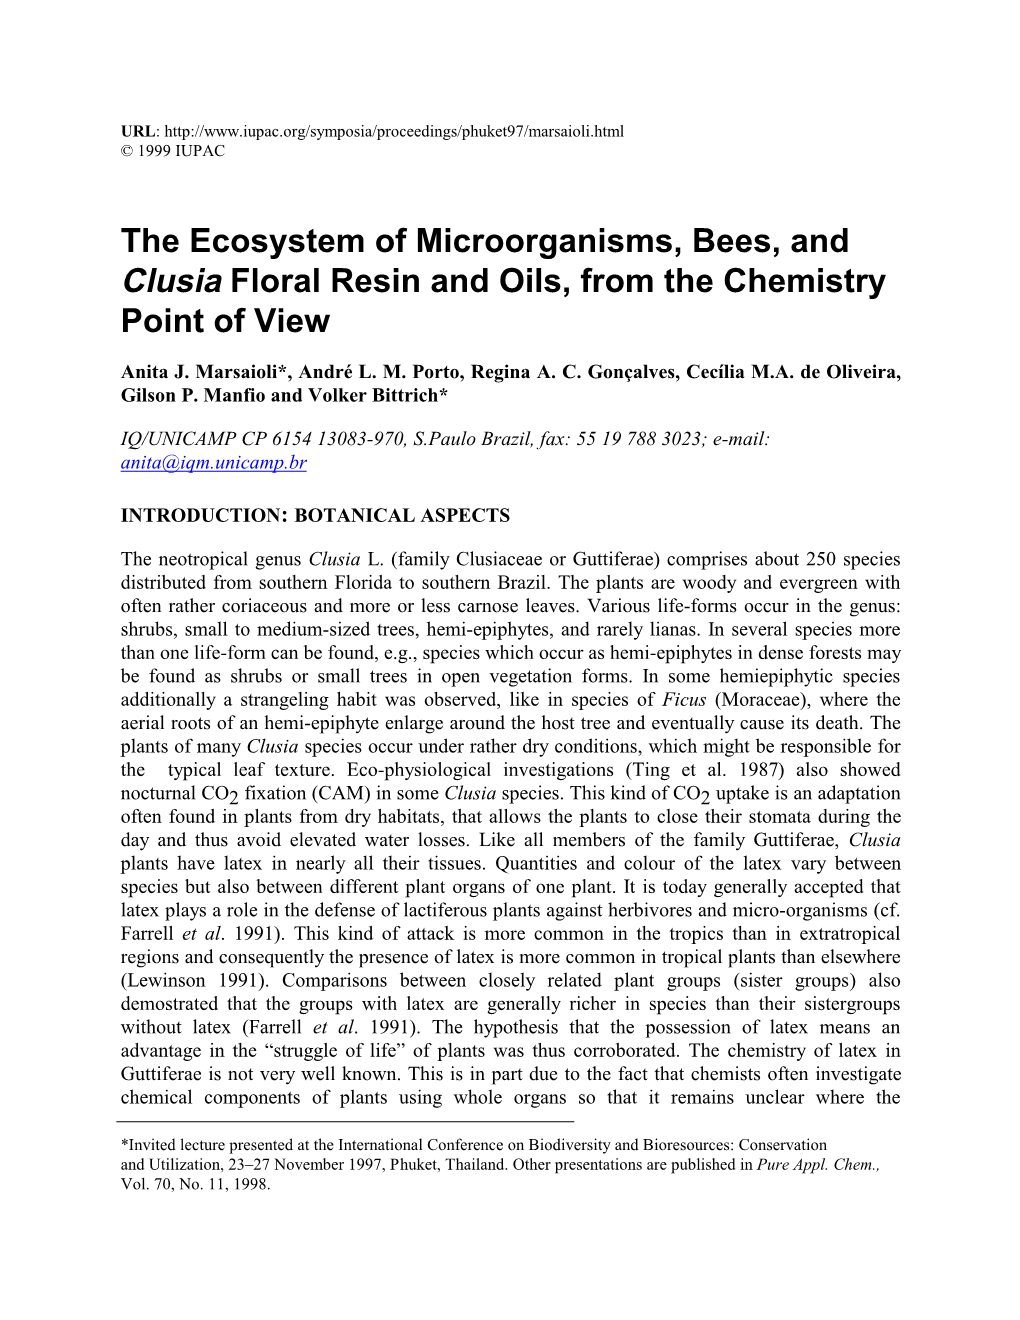 The Ecosystem of Microorganisms, Bees, and Clusia Floral Resin and Oils, from the Chemistry Point of View